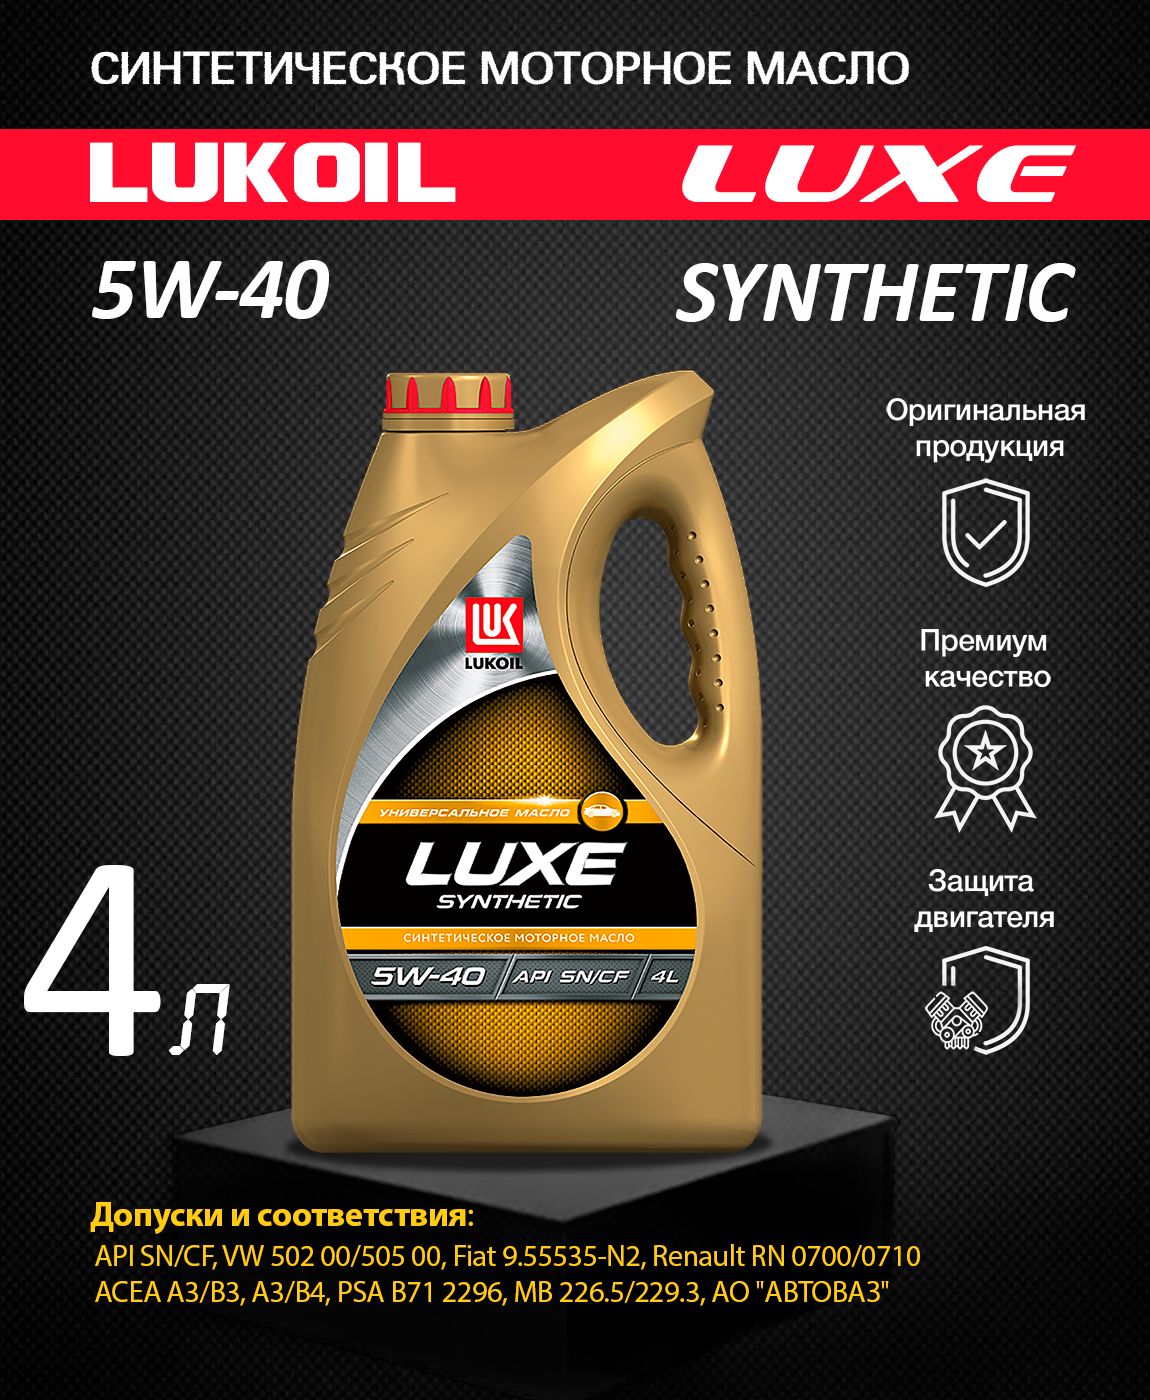 Лукойл 5 40 отзывы. Lukoil Luxe Synthetic 5w-40. Lukoil Luxe Synthetic 5w-40 (ACEA a3/b4-08; API SM/CF). 207465 Лукойл. Автозаправка Лукойл.